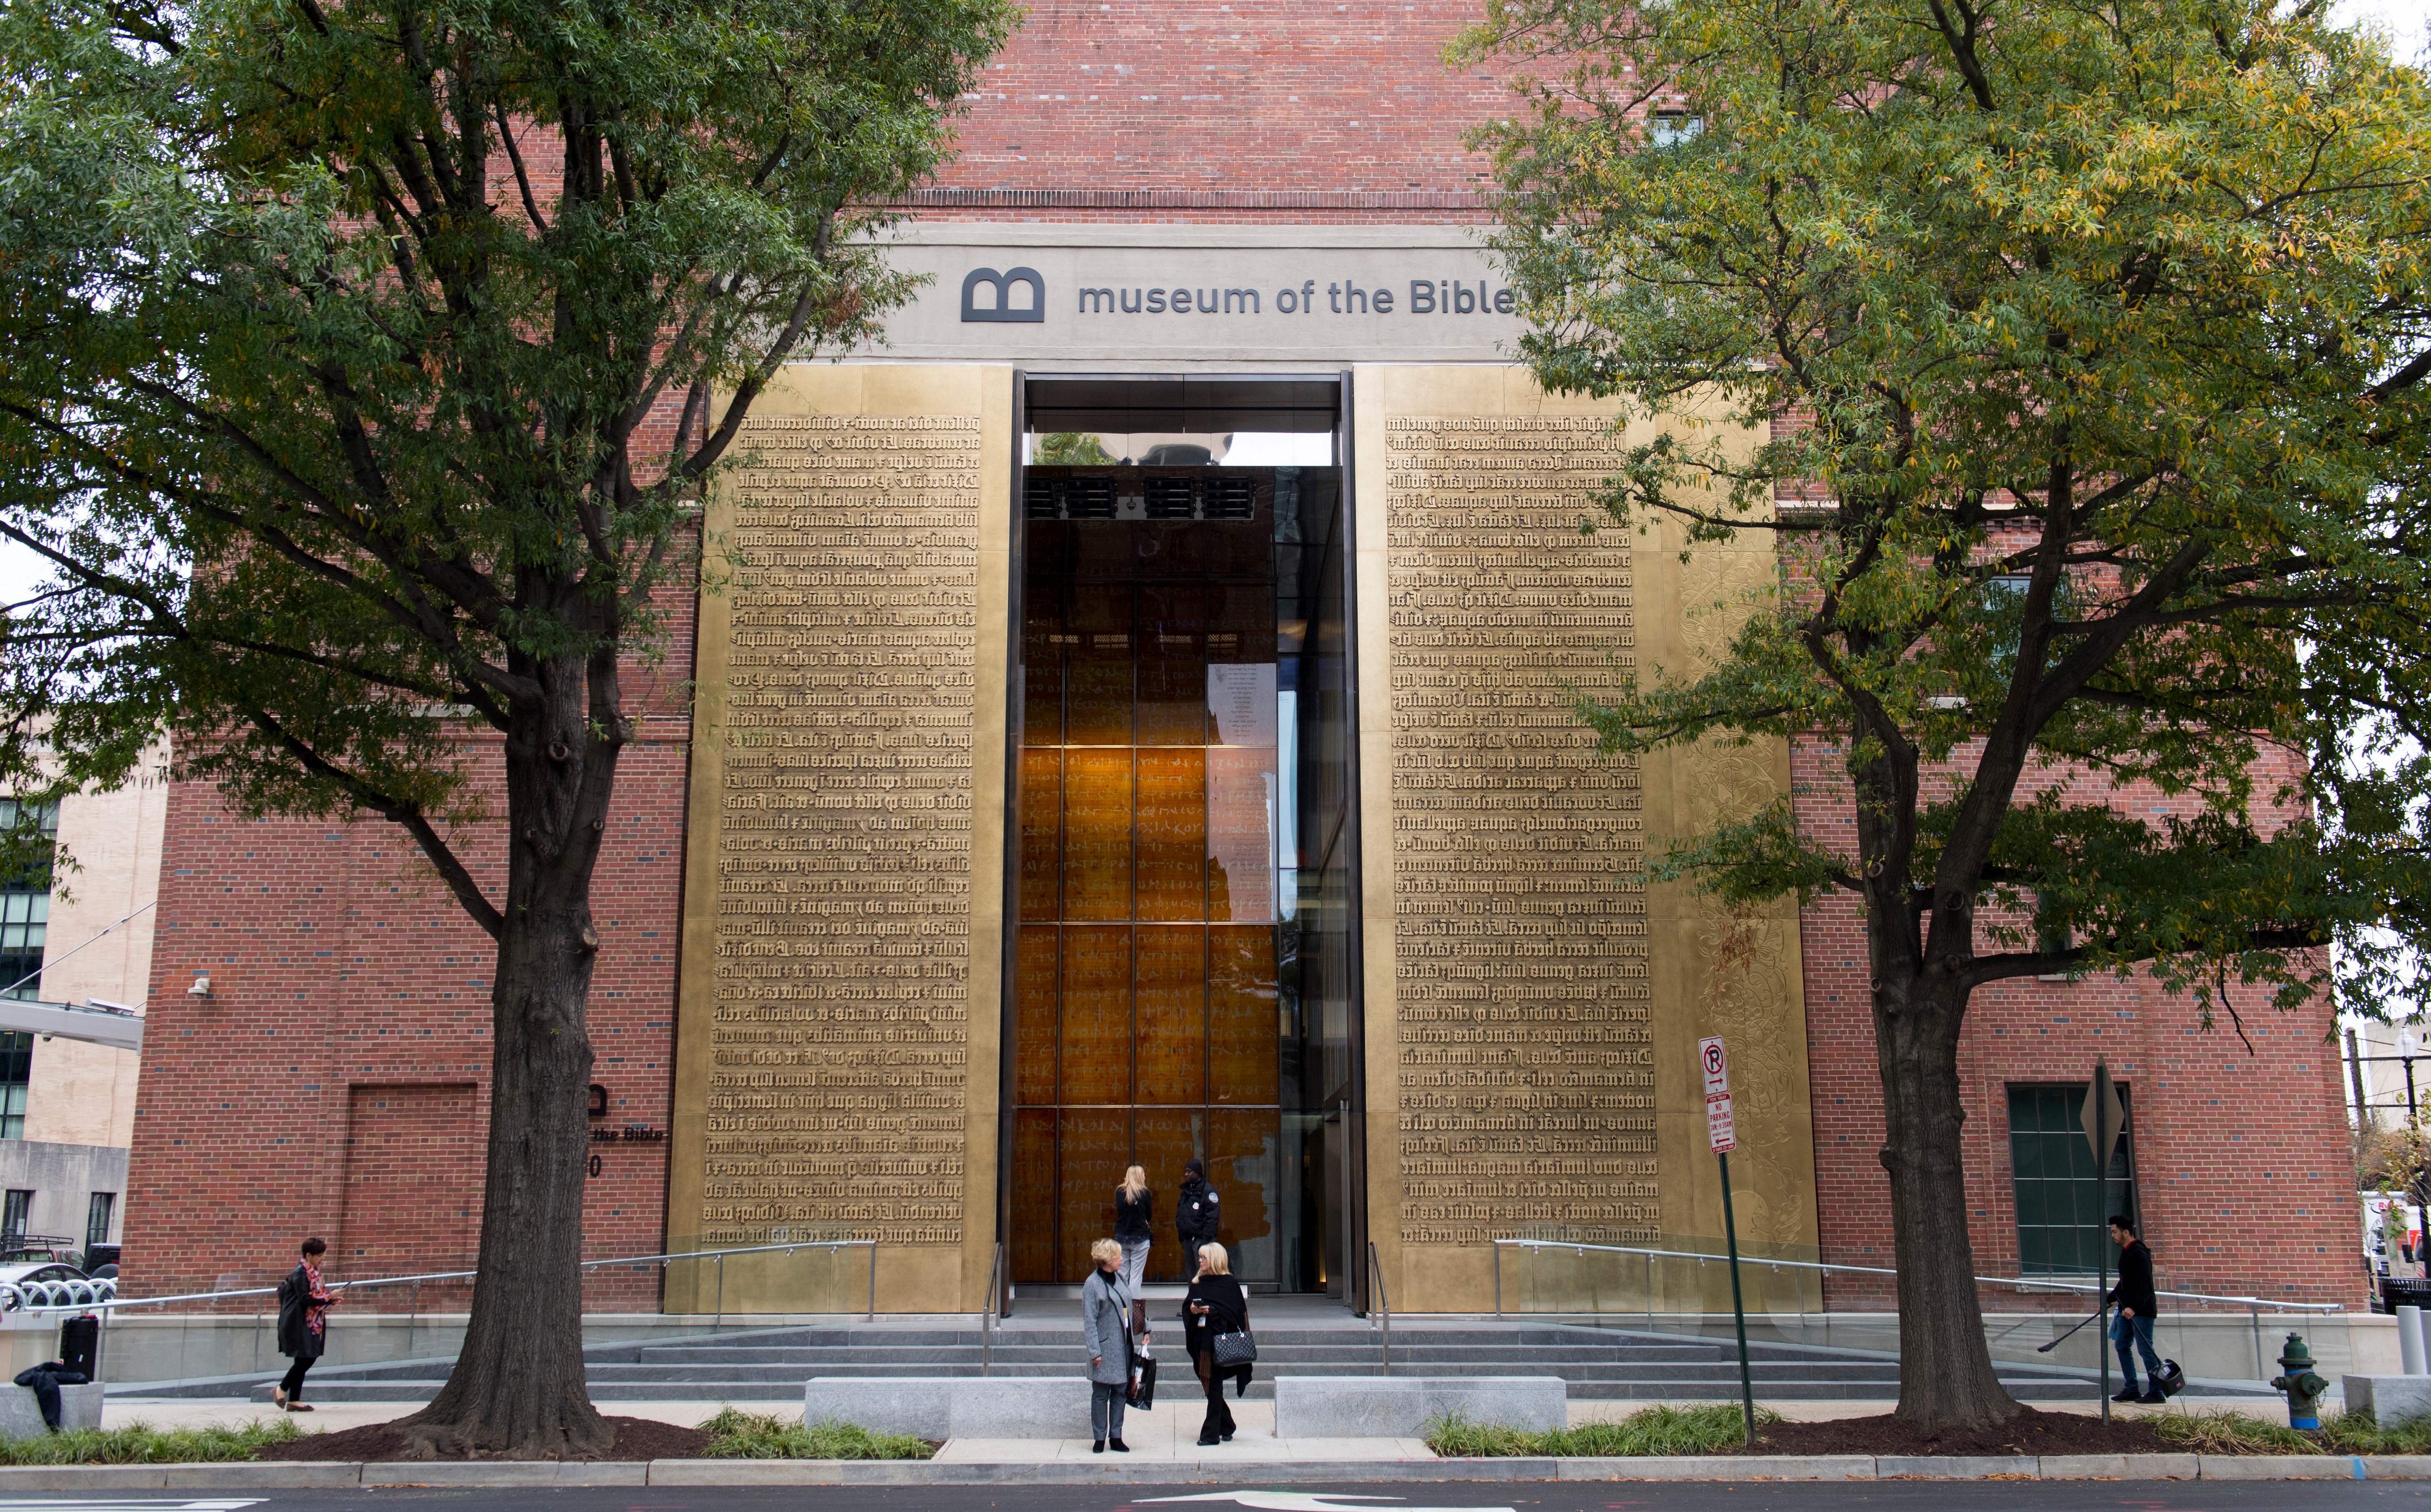 The new Museum of the Bible, a 430,000 square-foot (39,948 square-meter) museum, dedicated to the history, narrative and impact of the Bible, is seen in Washington, DC, November 14, 2017. SAUL LOEB/AFP/Getty Images